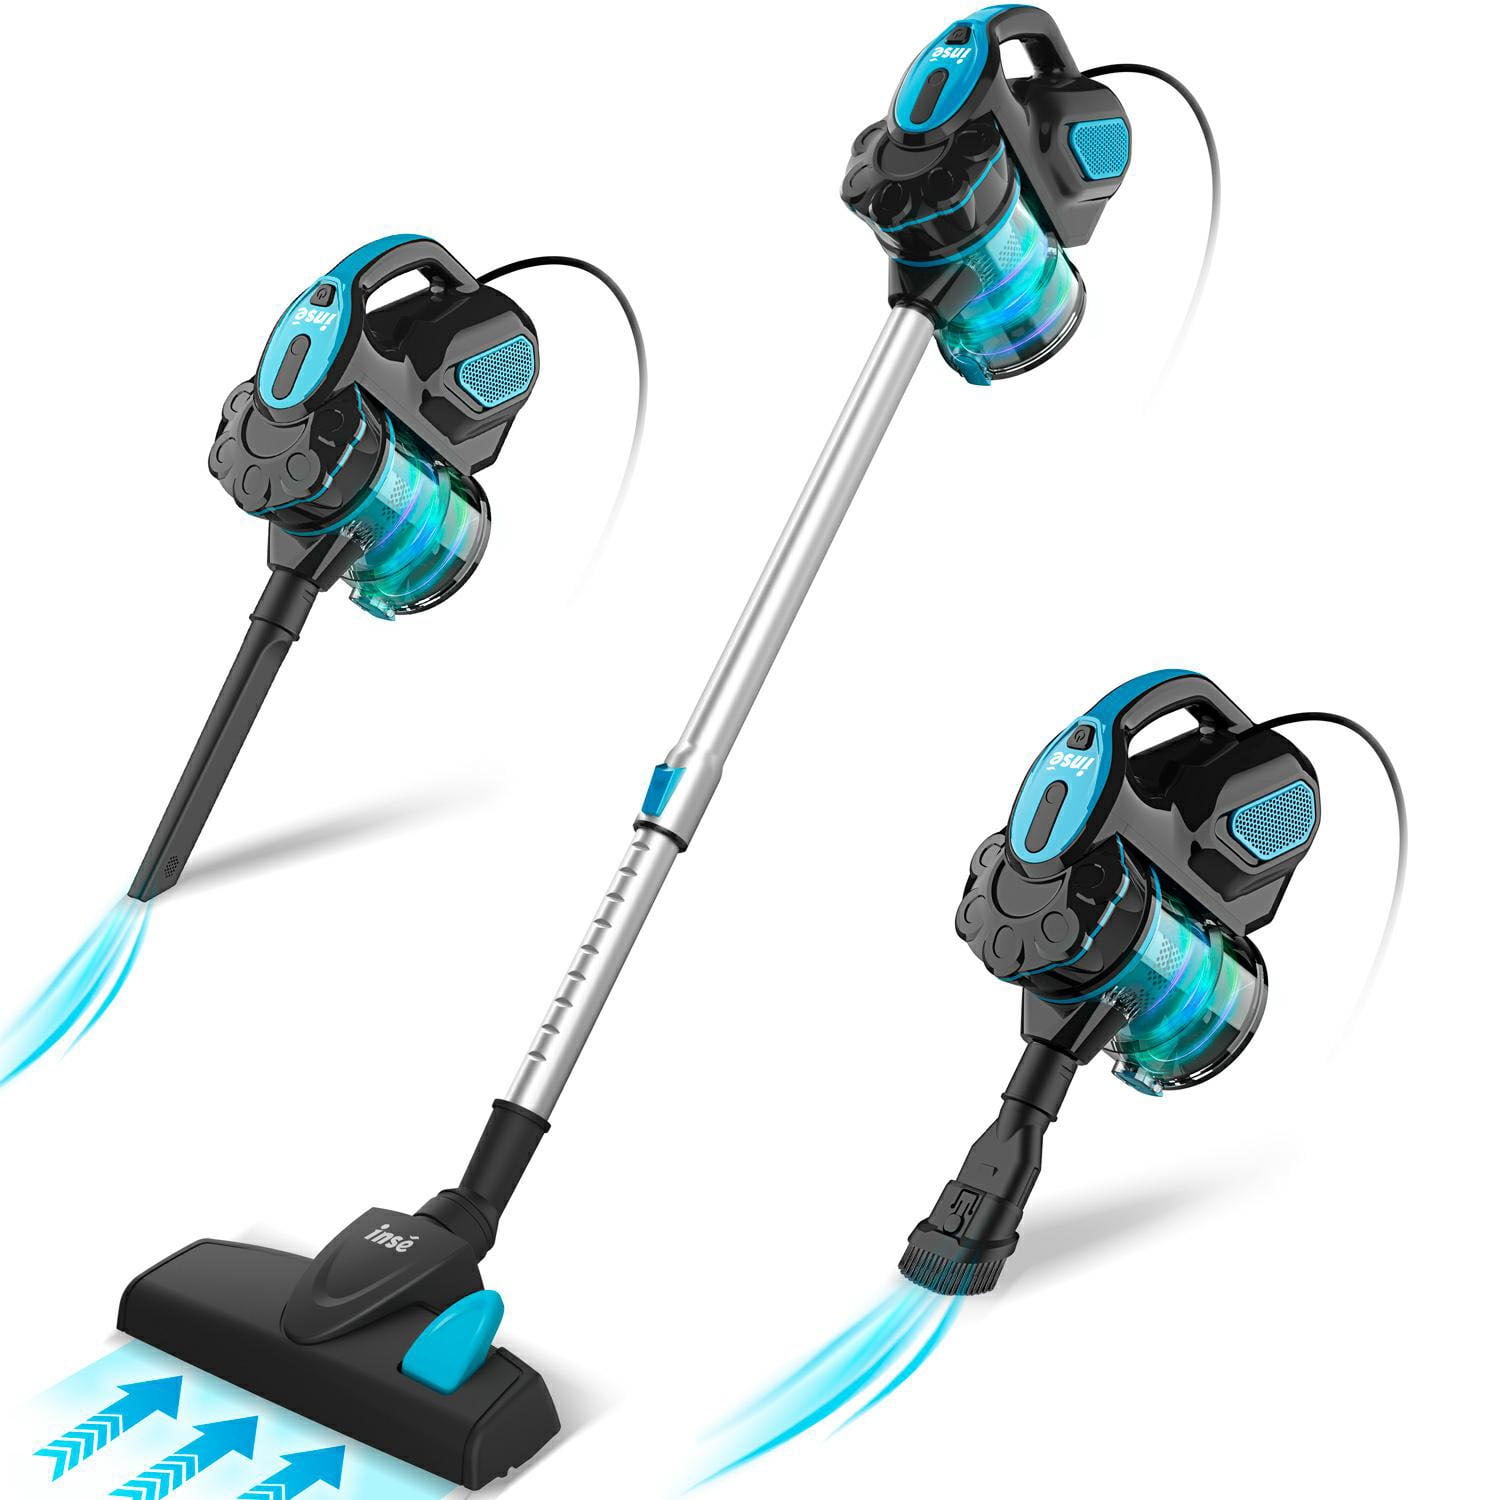 s INSE Cordless Vacuum Is On Sale For Over $600 Off Right Now